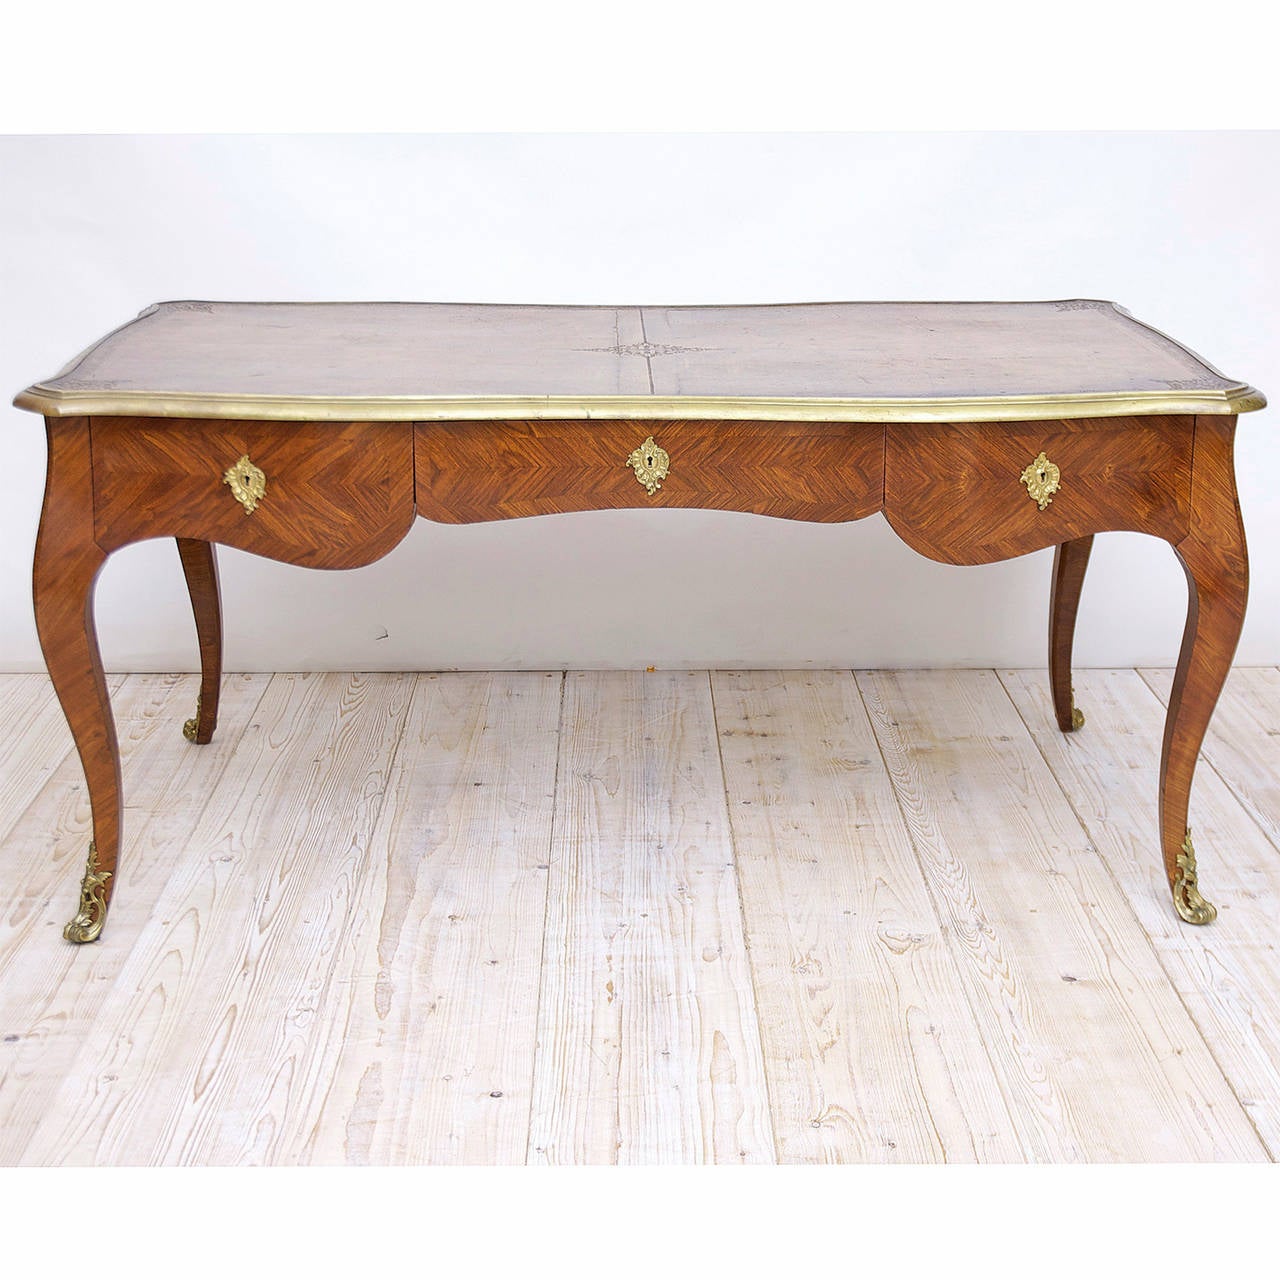 An exceptionally fine bureau plat or desk in the Louis XV style in parquetry kingwood with serpentine form on all four sides, cabriole legs terminating with bronze doré sabots, stepped molding in brass around perimeter of inset leather top. Offers